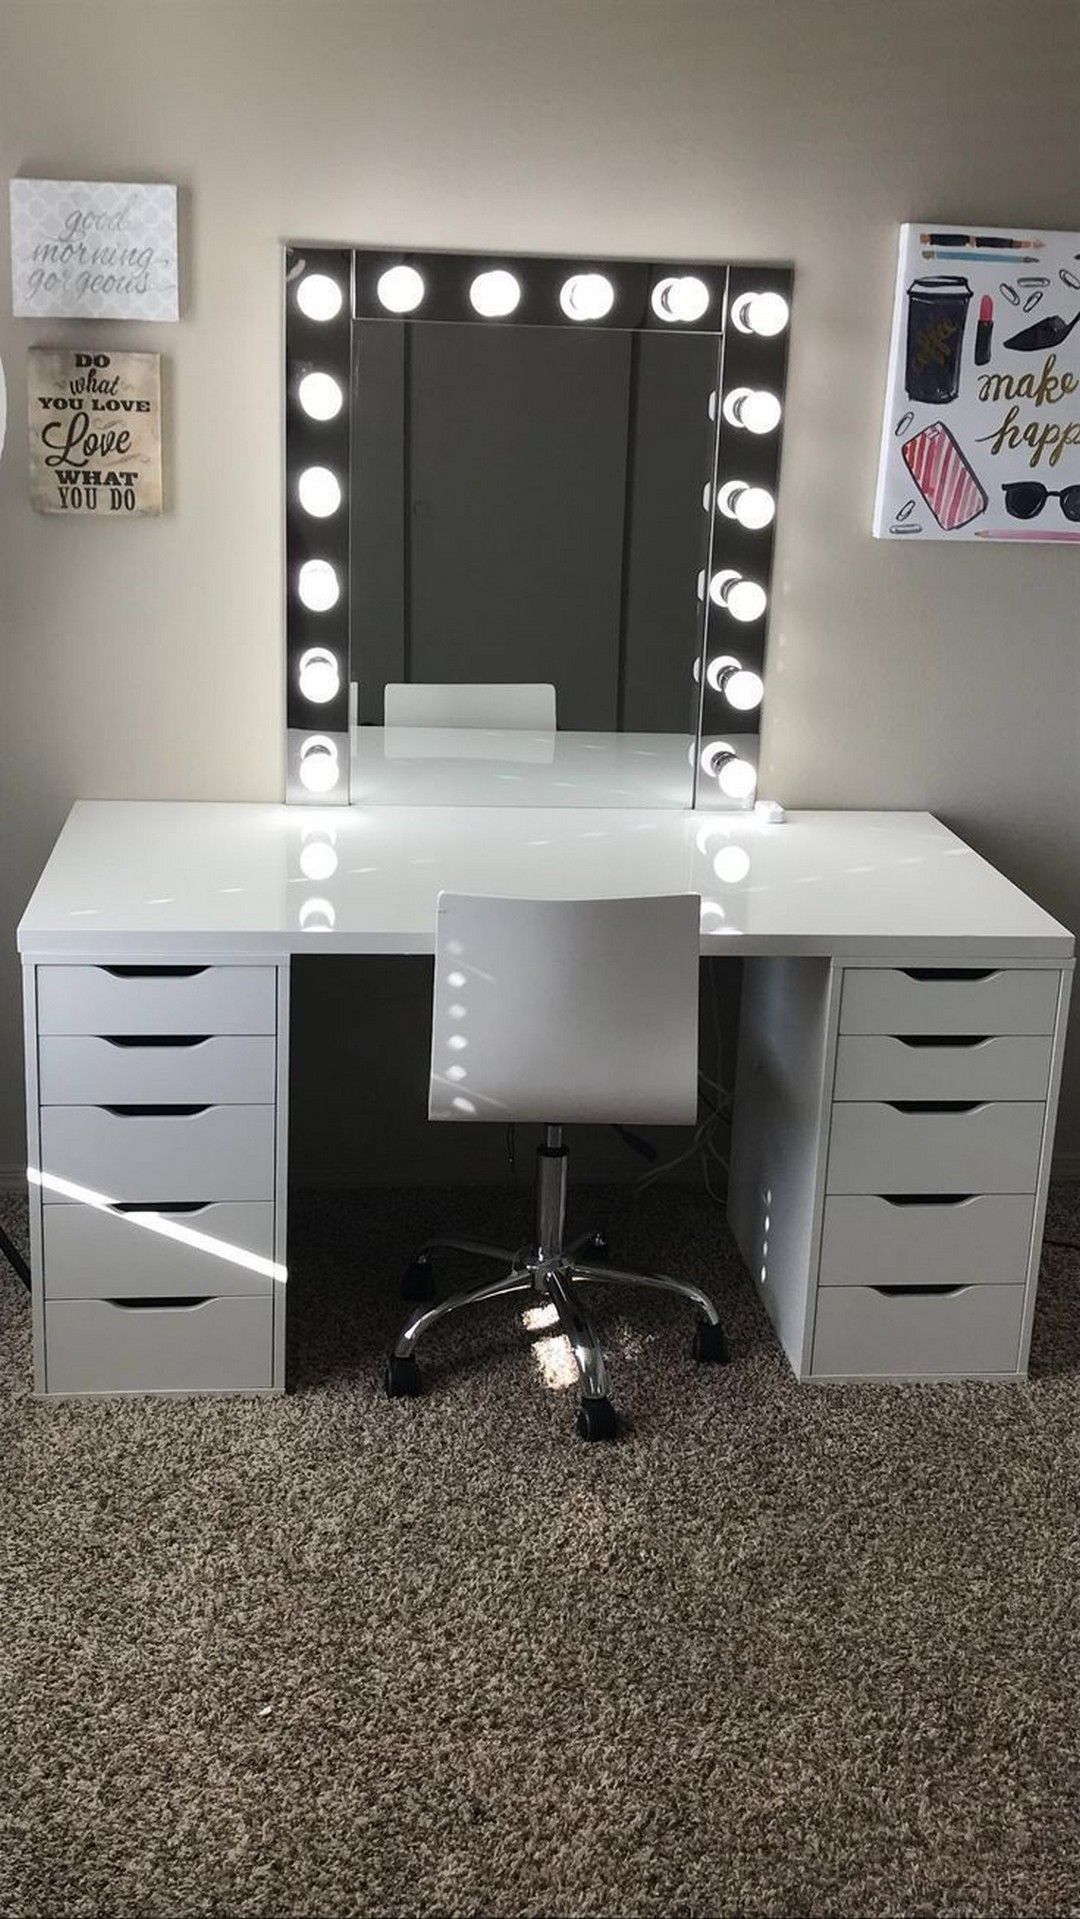 28 We love The Elegant Makeup Room Ideas By Some Of The Best - 28 We love The Elegant Makeup Room Ideas By Some Of The Best -   beauty Room diy